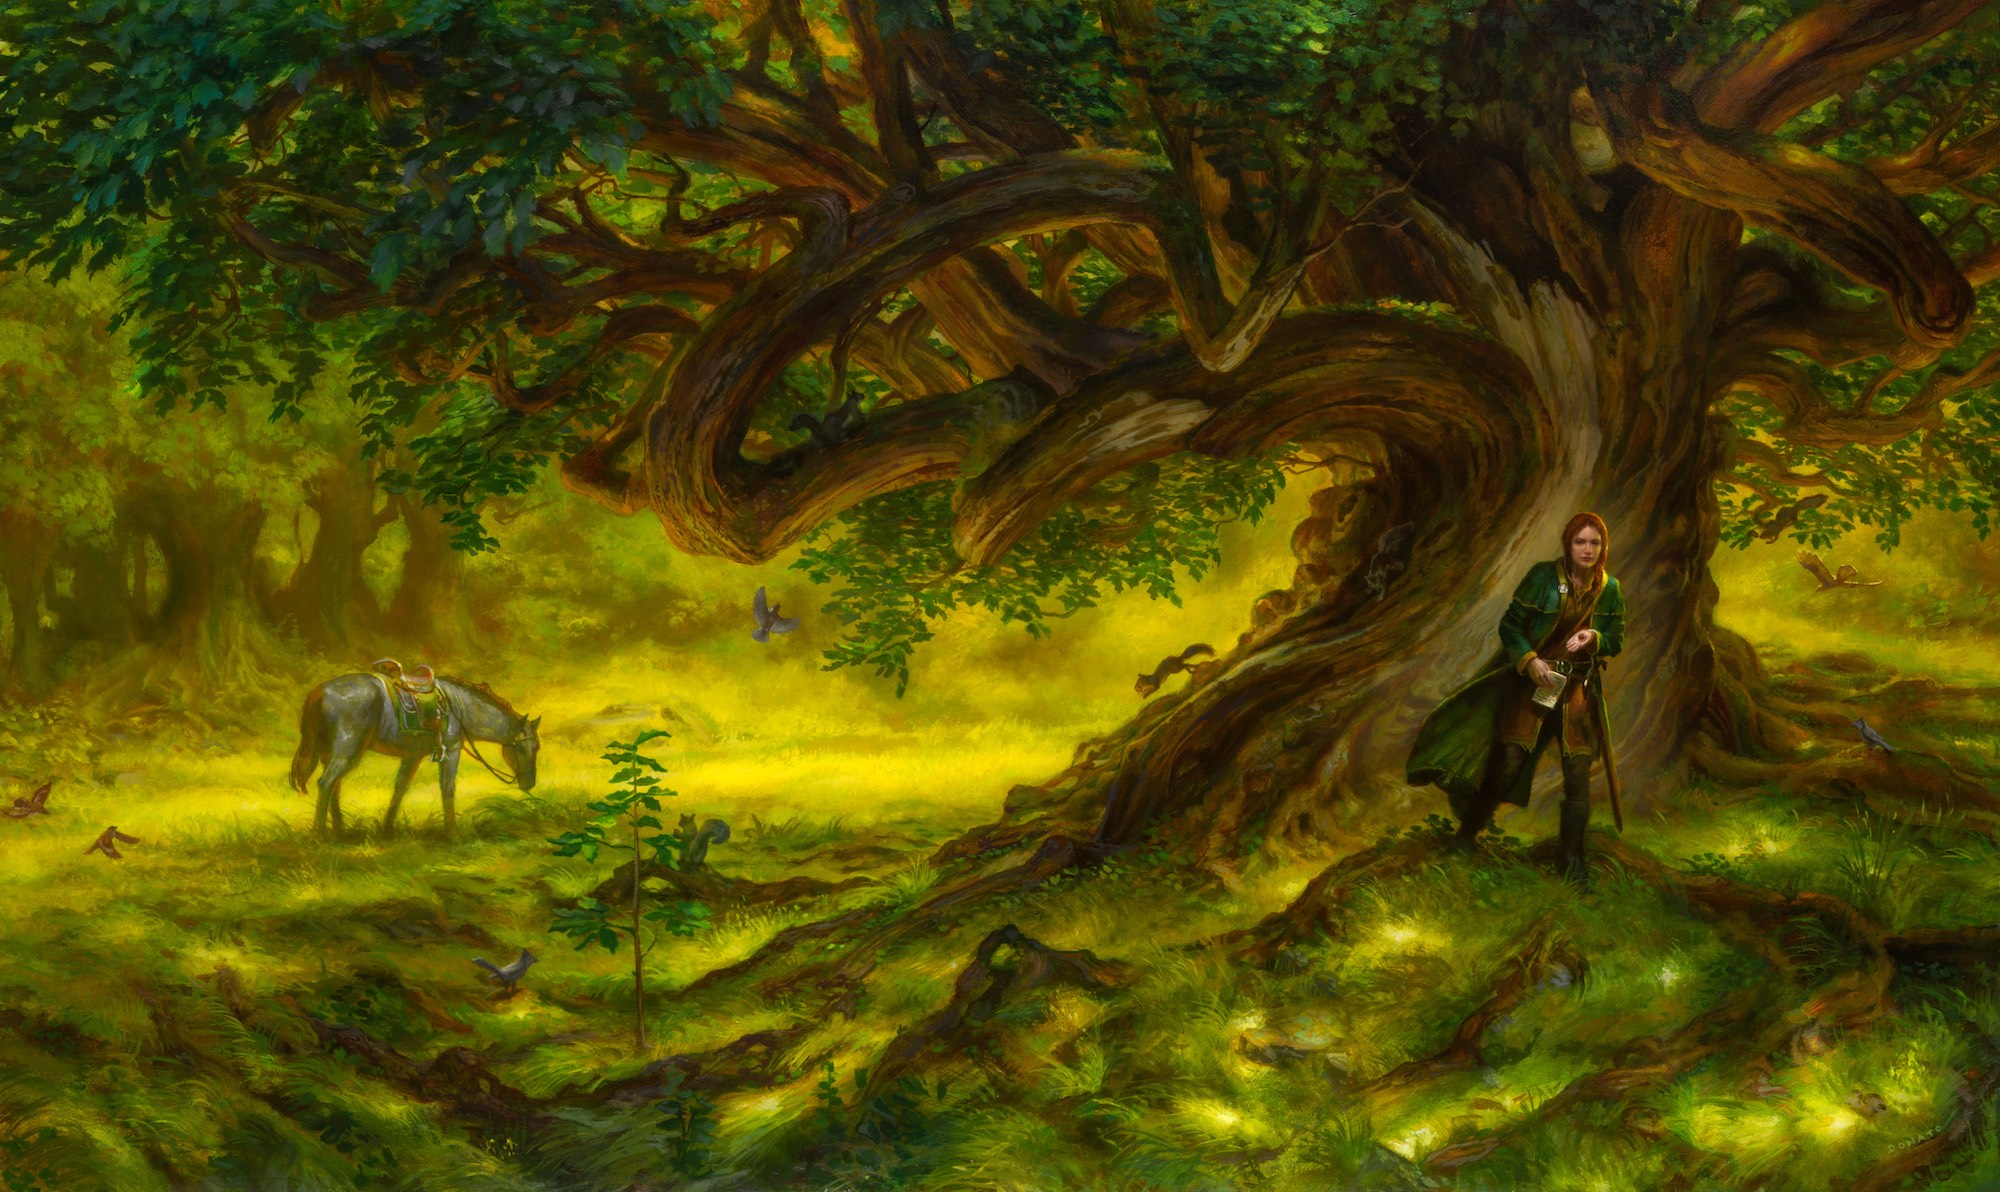 Spirit of the Wood
cover art for the novel by Kristen Britain
21" x 36"  Oil on Panel 2023
prints available in the store